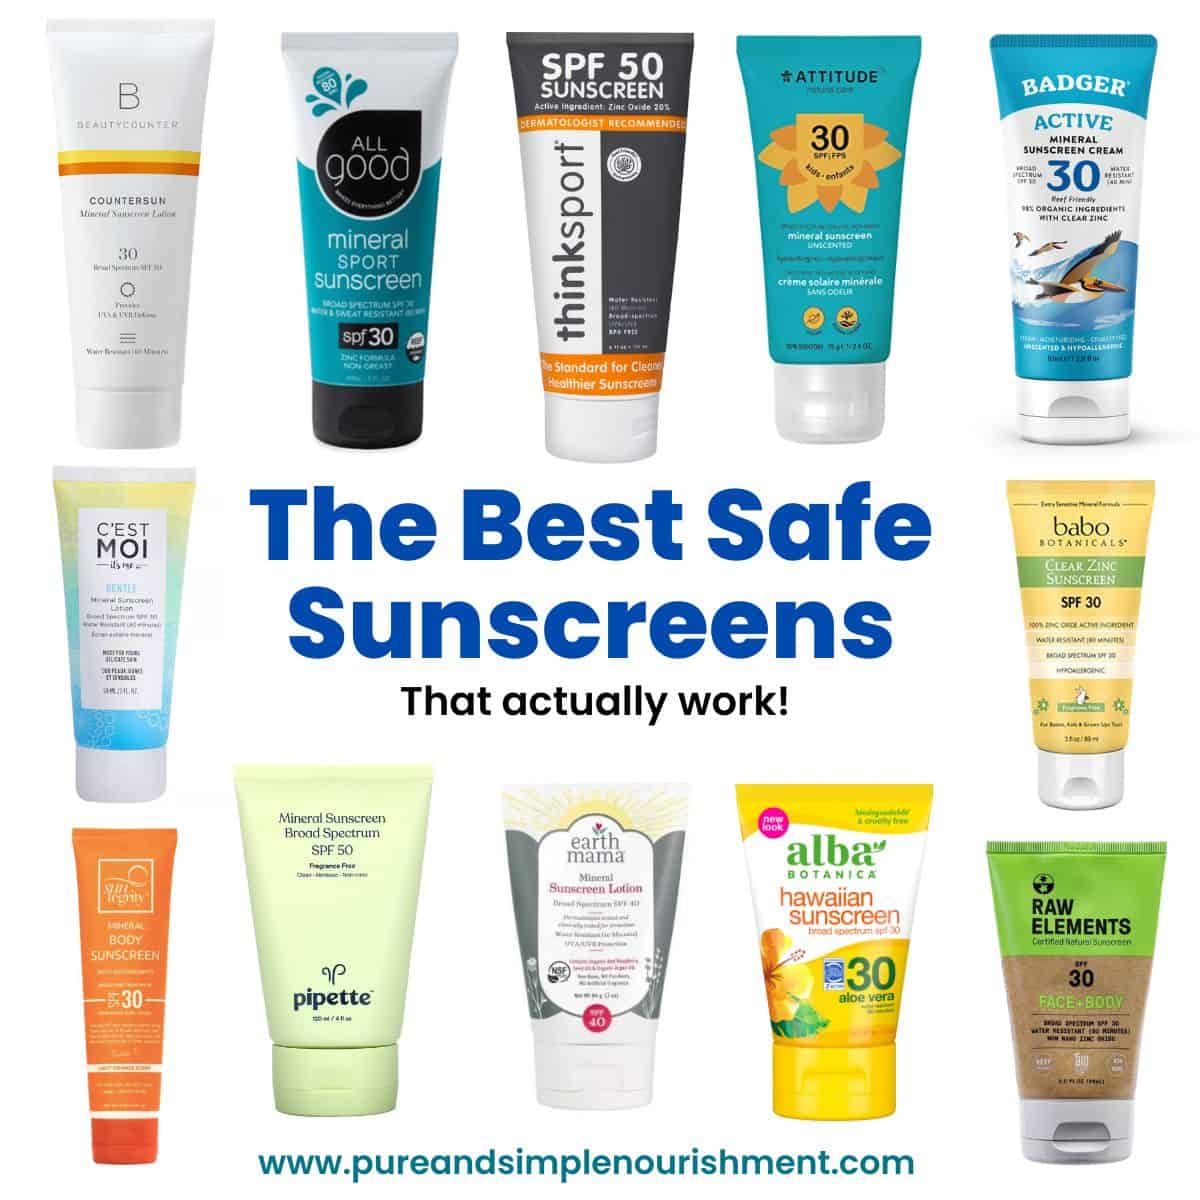 A collage of many different sunscreen bottles with the title The Best Safe Sunscreens over them.